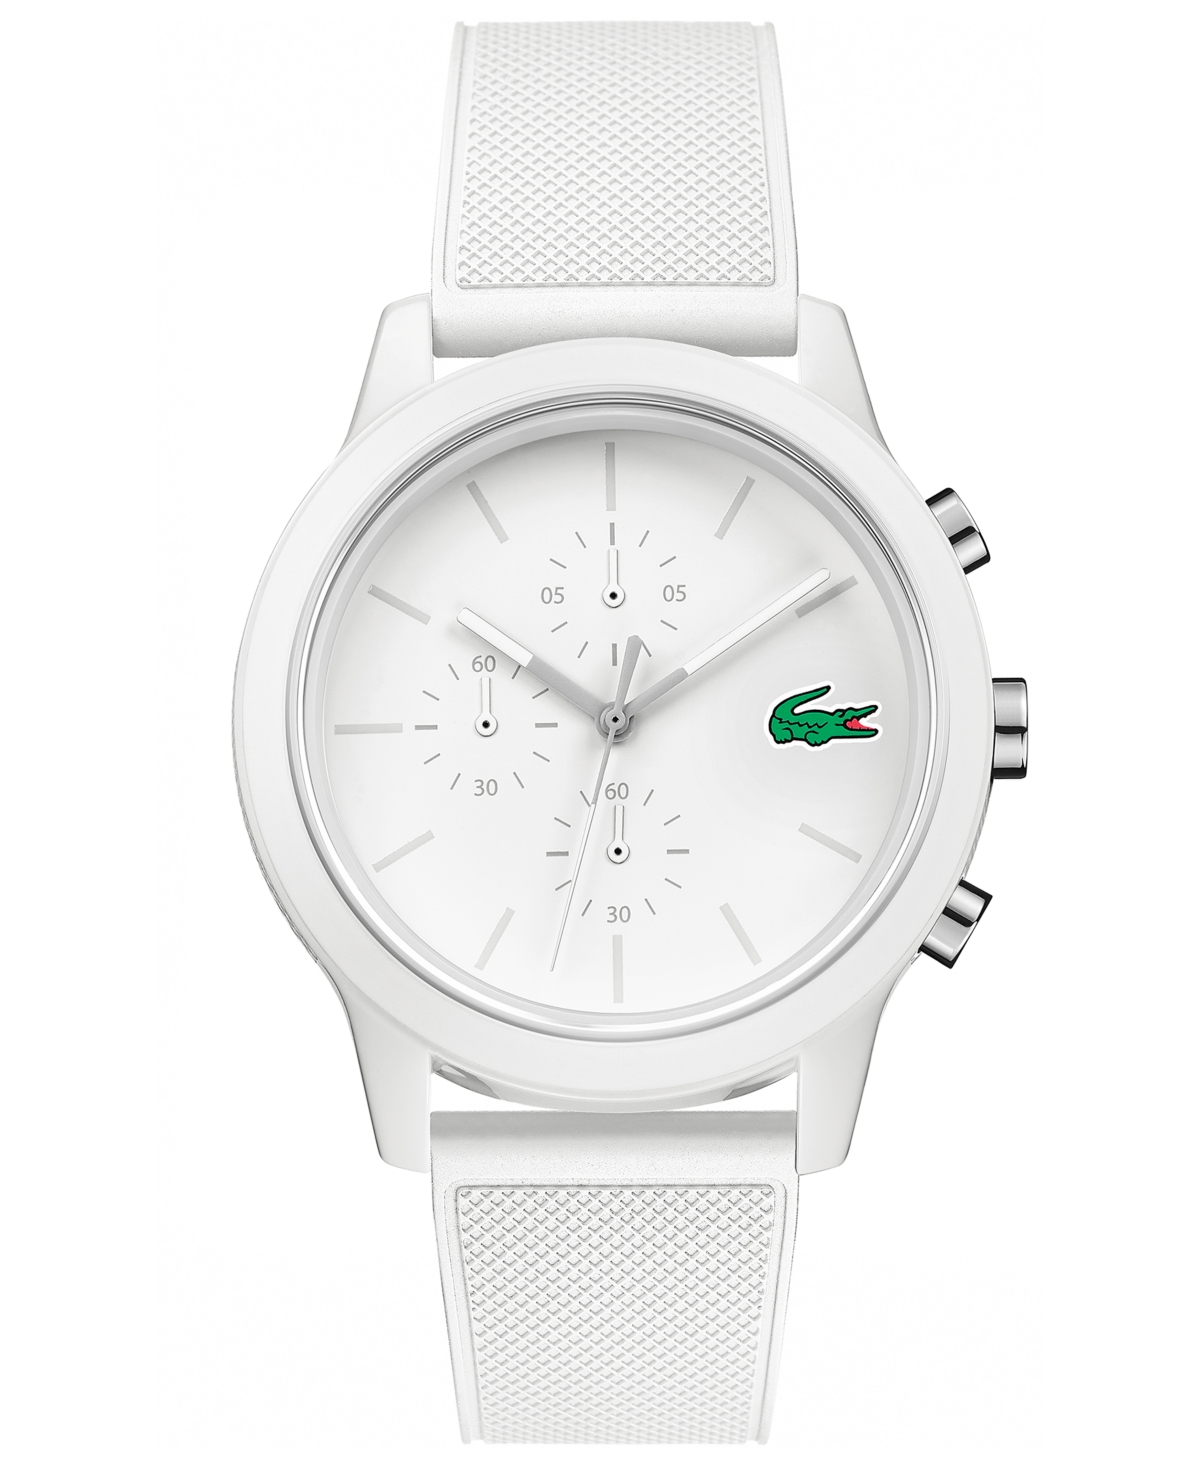 LACOSTE MEN'S CHRONOGRAPH L.12.12 WHITE SILICONE STRAP WATCH 44MM WOMEN'S SHOES